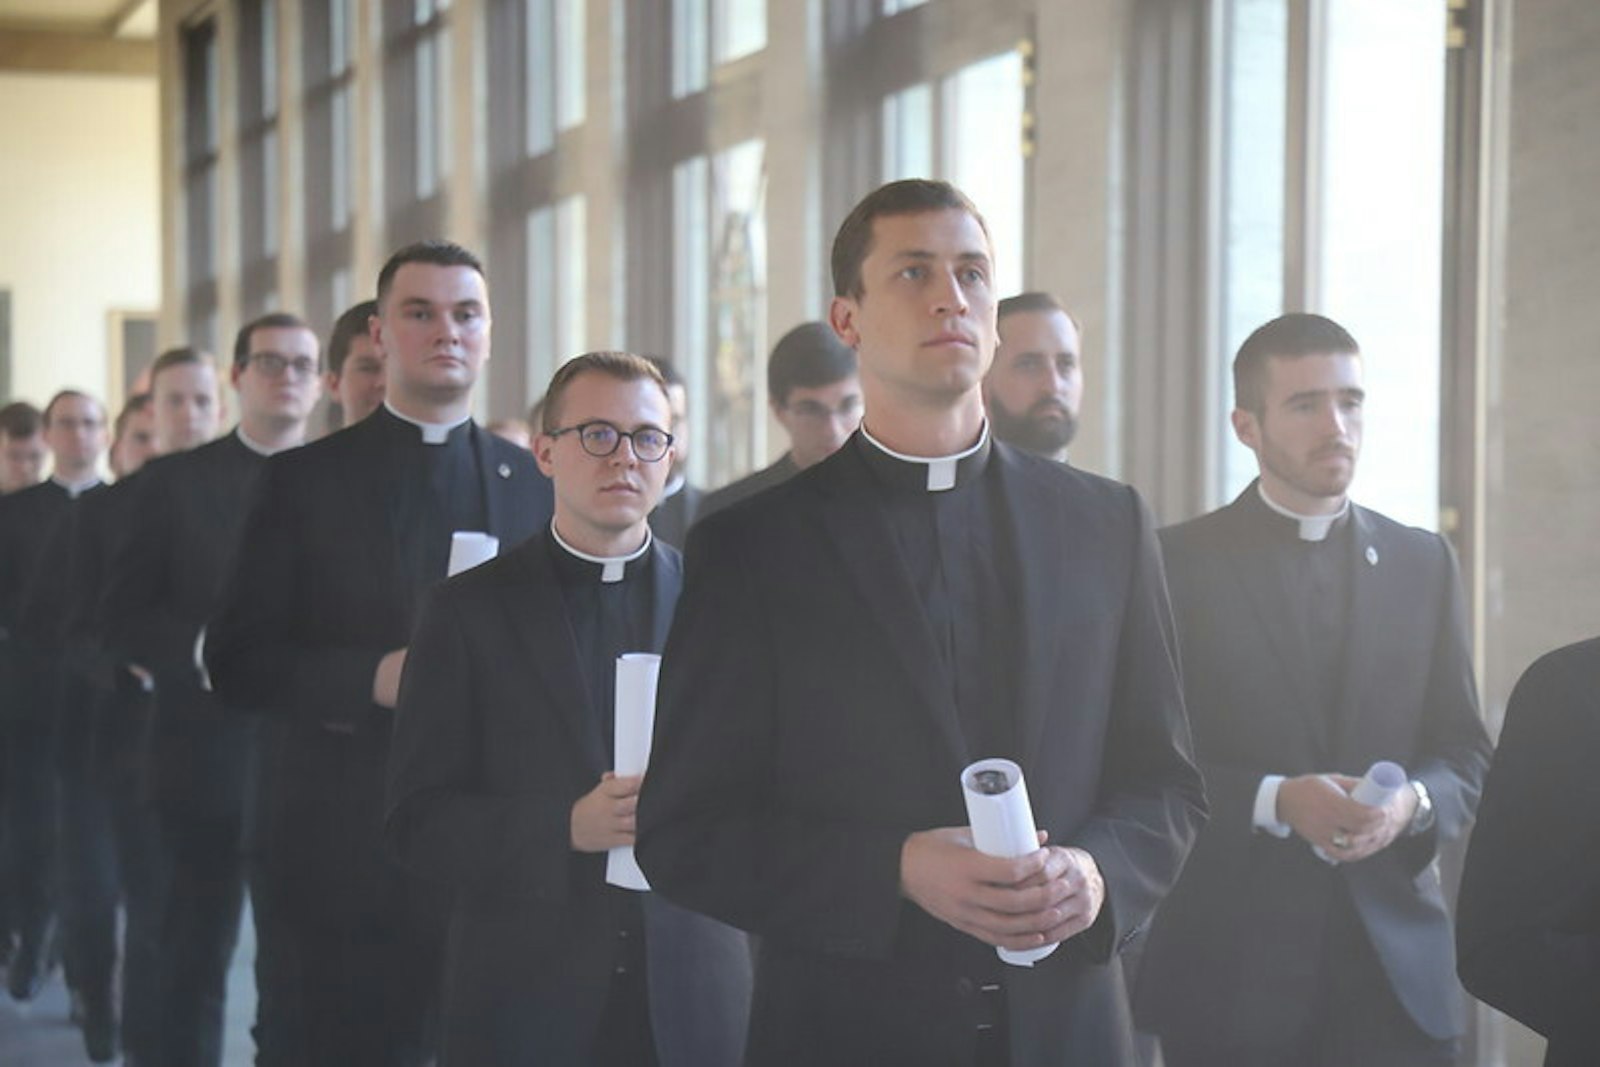 Seminarians process through the halls during a liturgy at the Pontifical North American College in Rome.